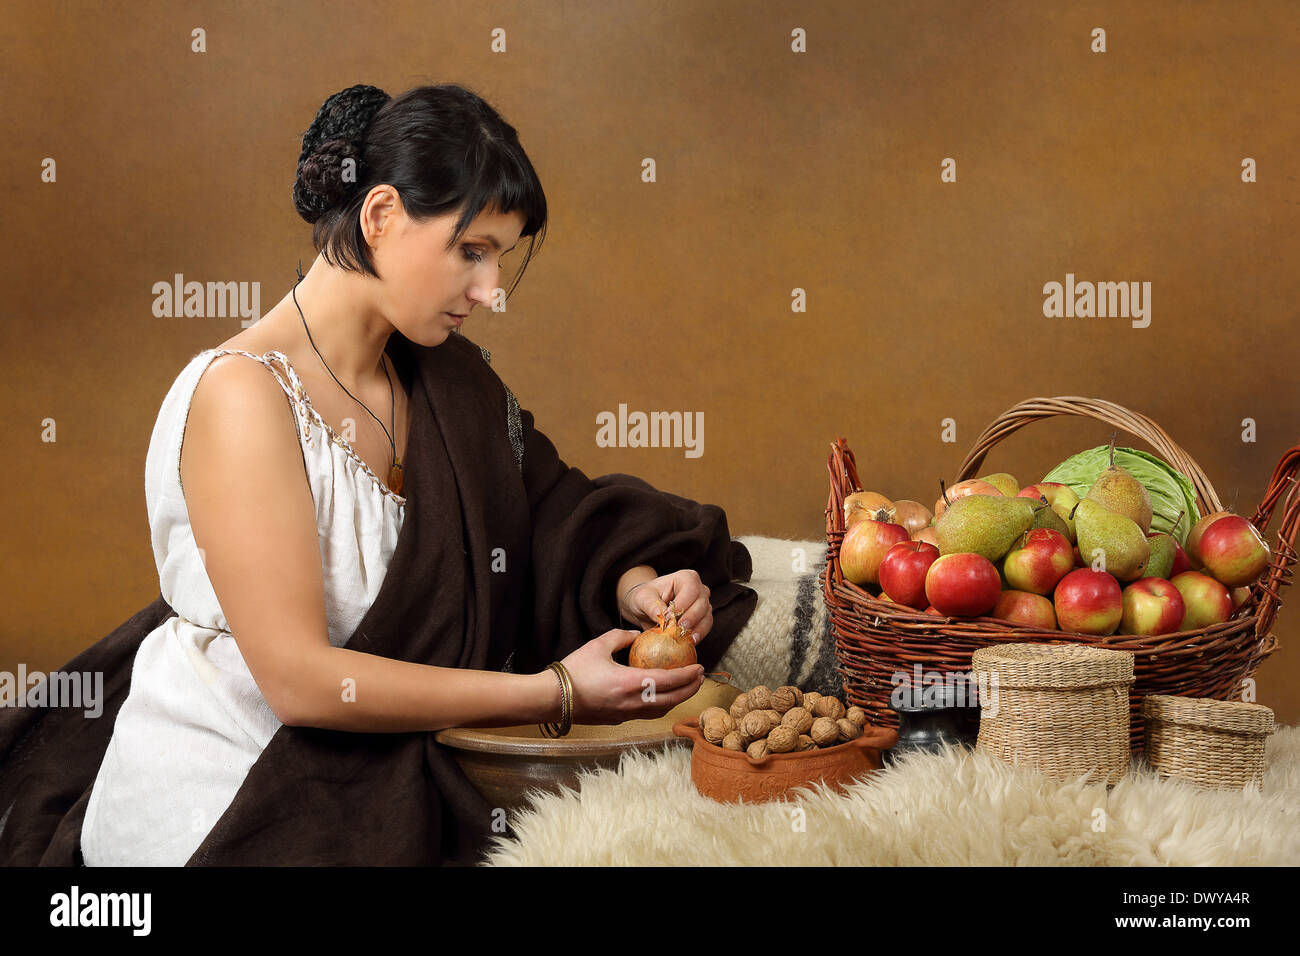 Young Romana peeling the onion with basket full of fruits and vegetables. Concept studio portrait on brown background. Stock Photo